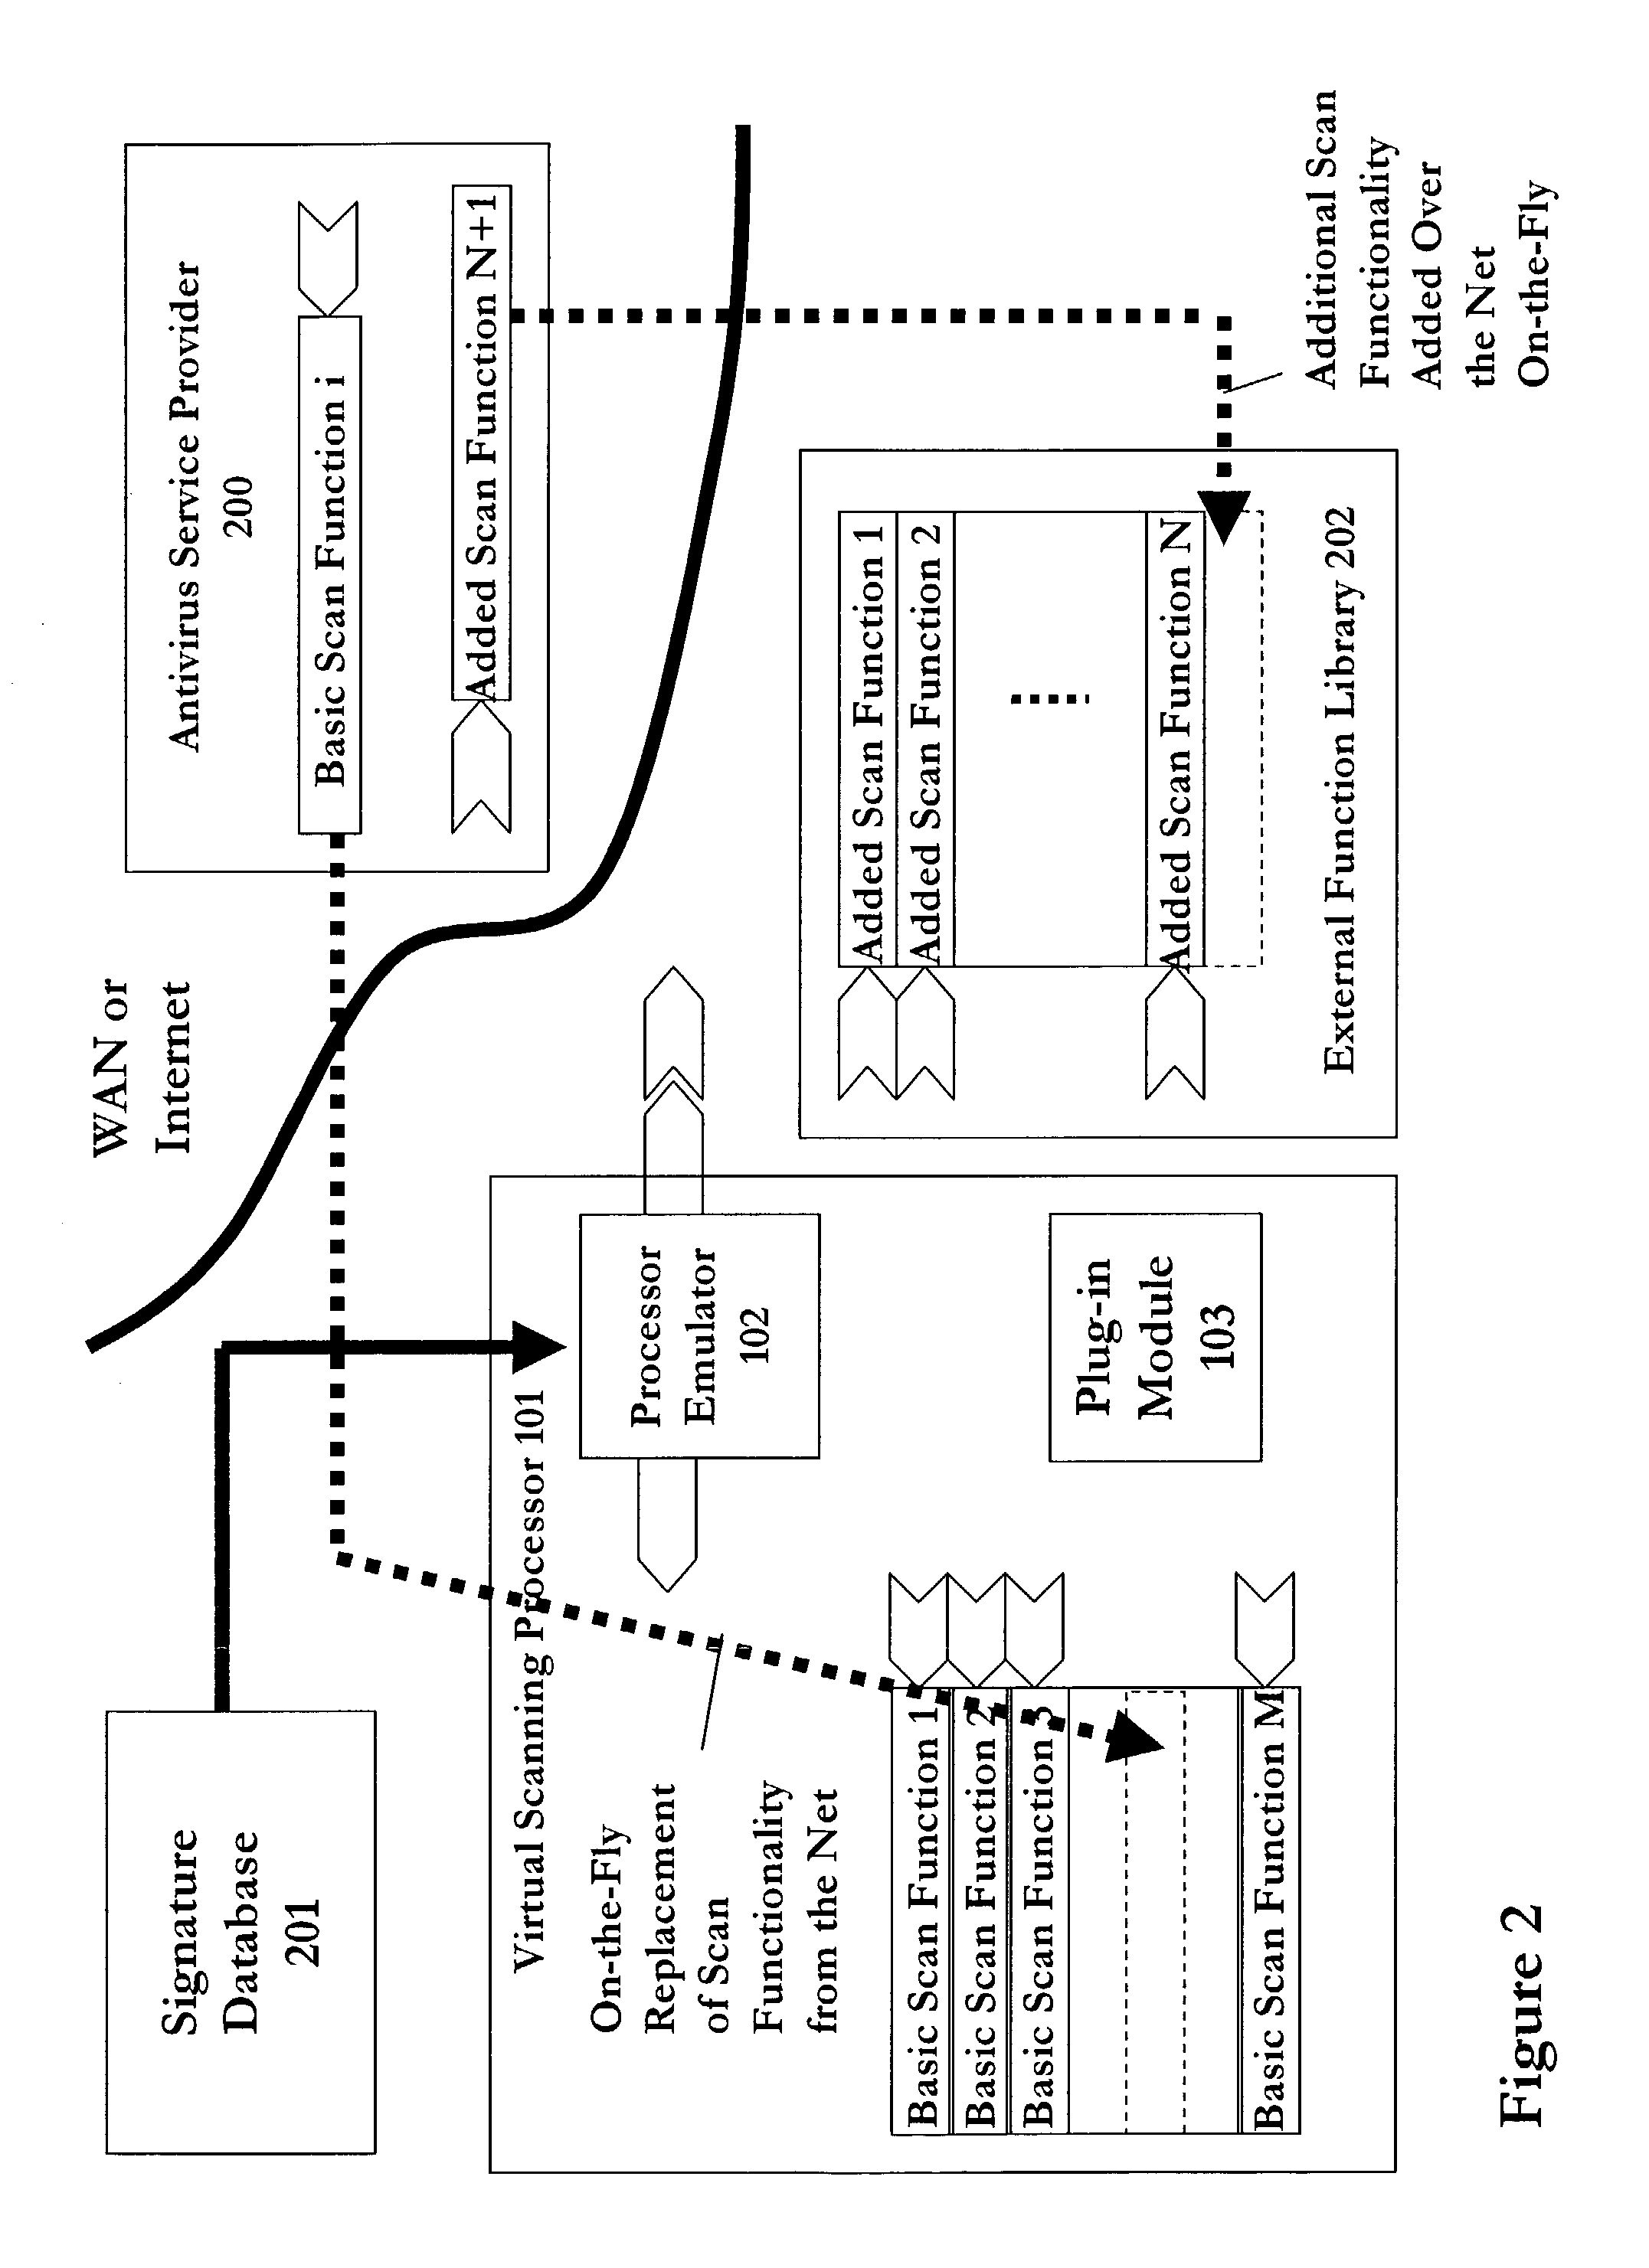 System and method having an antivirus virtual scanning processor with plug-in functionalities